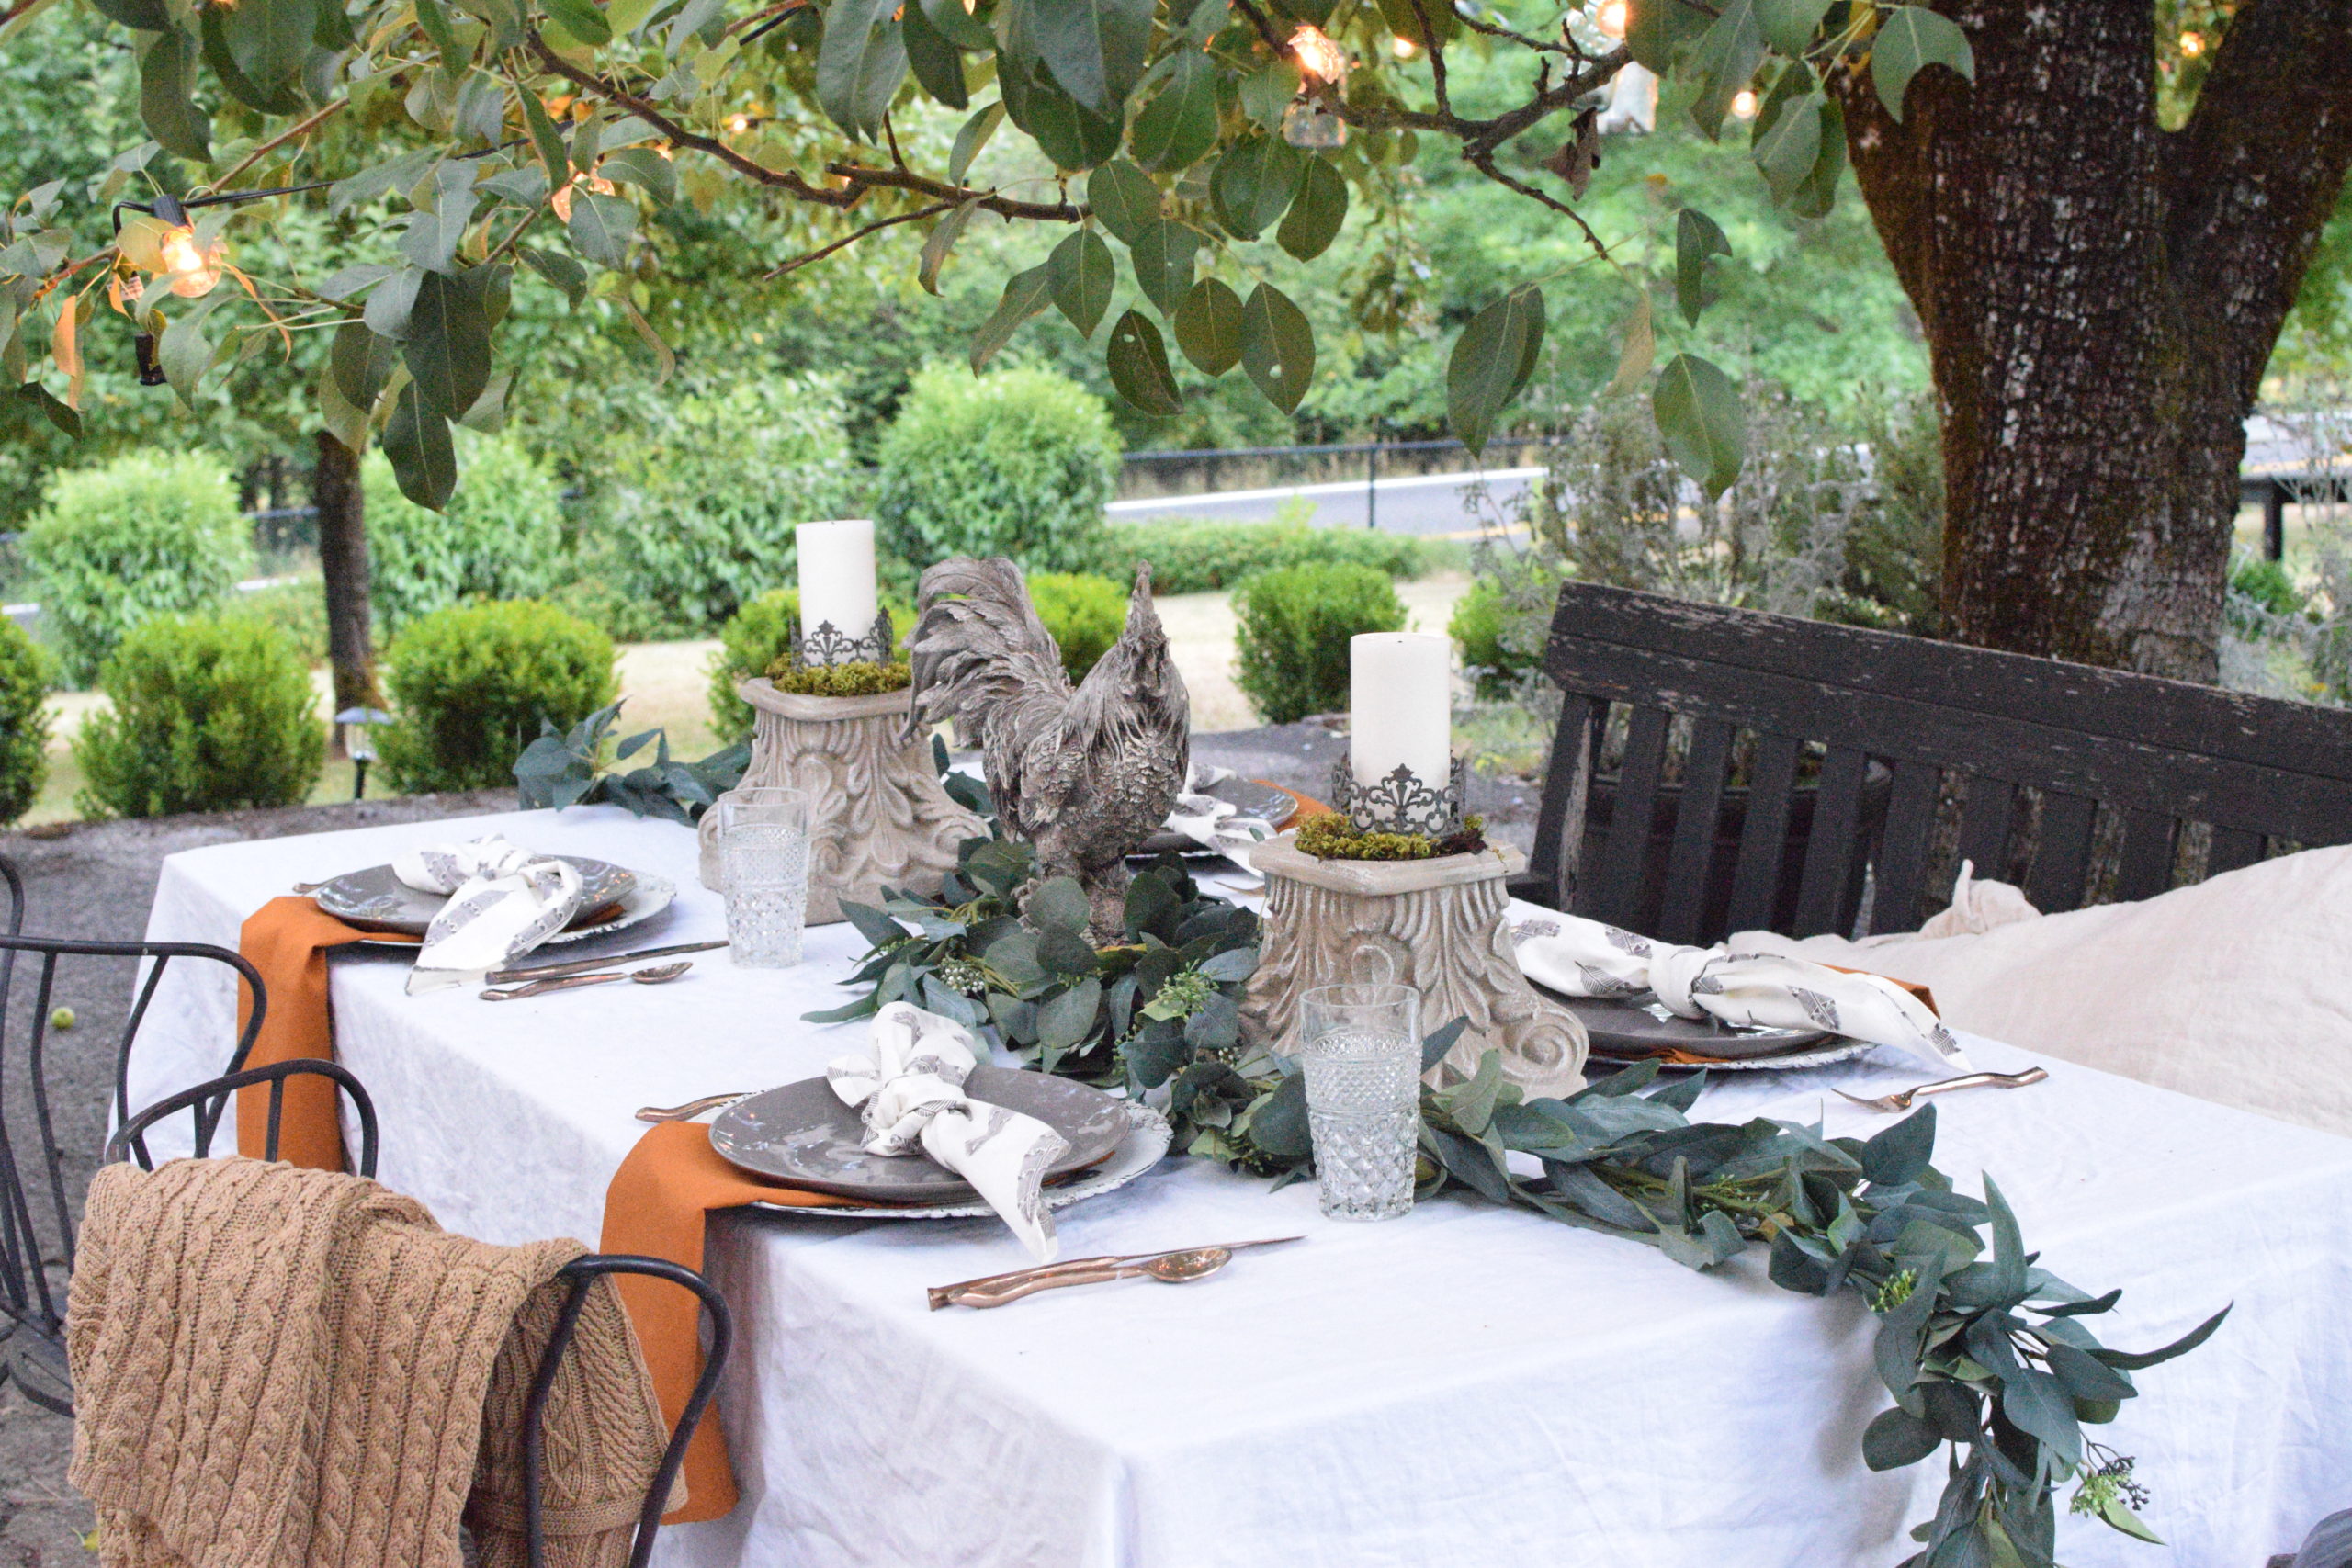 white linen table cloth qith greenery in middle and 2 candle pedestals with rooster in centerpiece